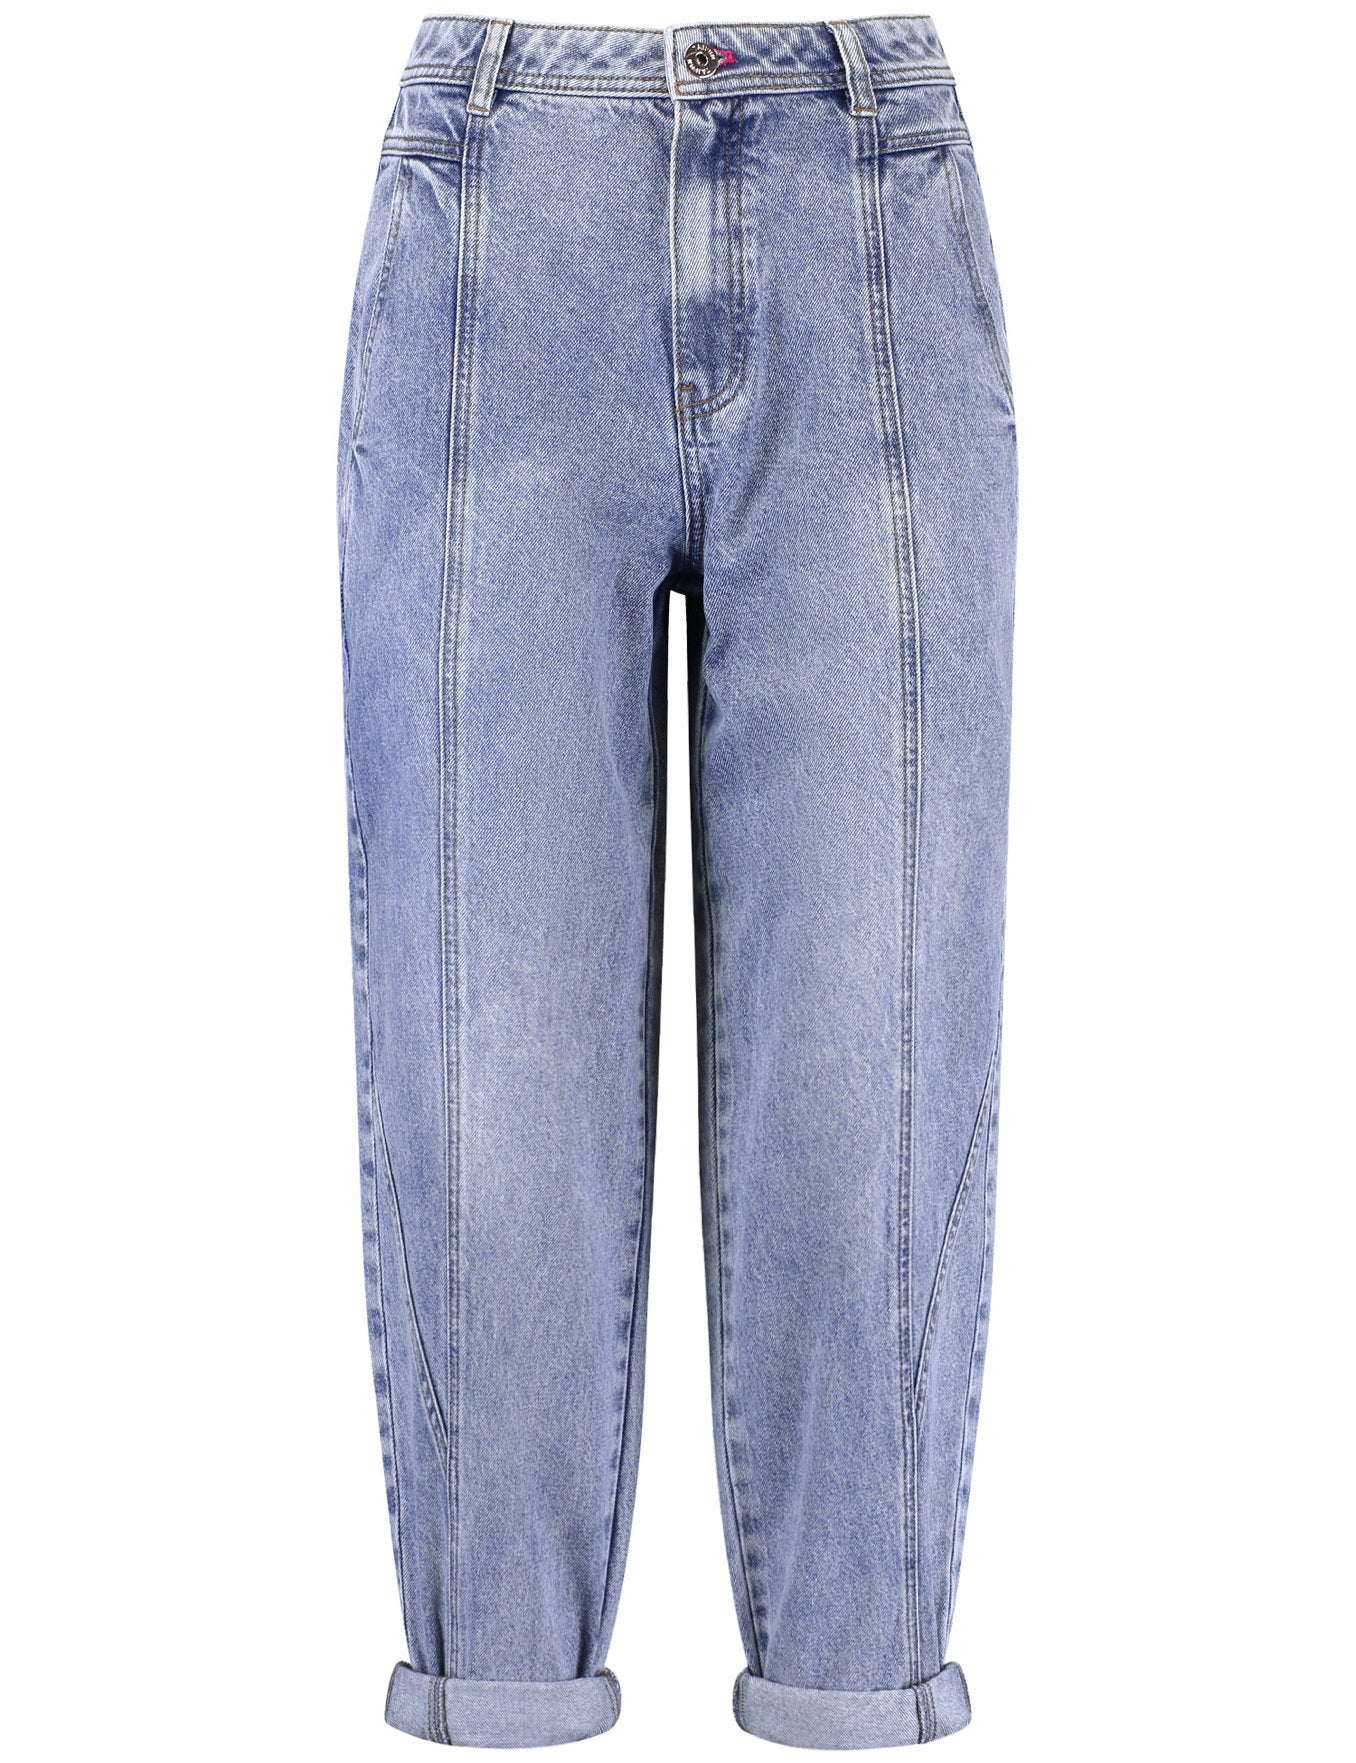 3/4-Length Jeans In A Balloon Fit_520328-11413_8969_07